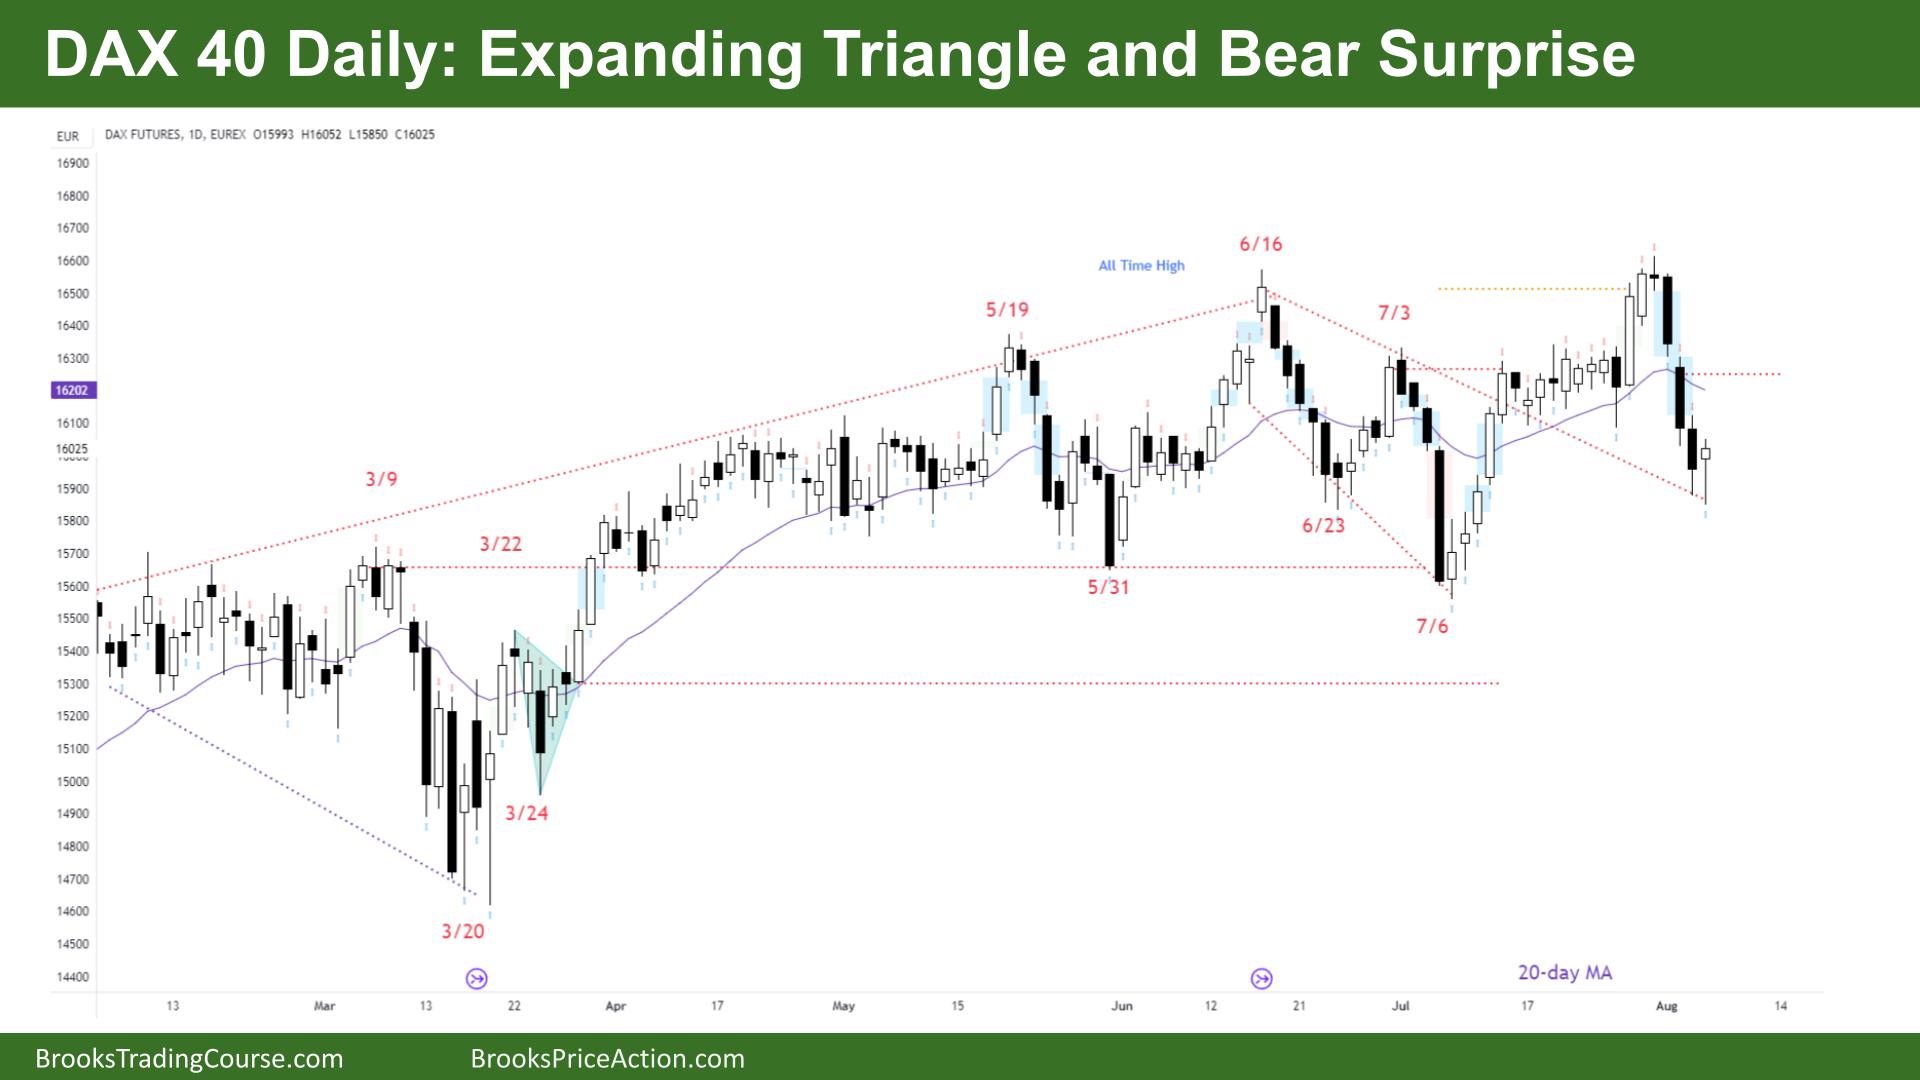 DAX 40 Expanding Triangle and Bear Surprise